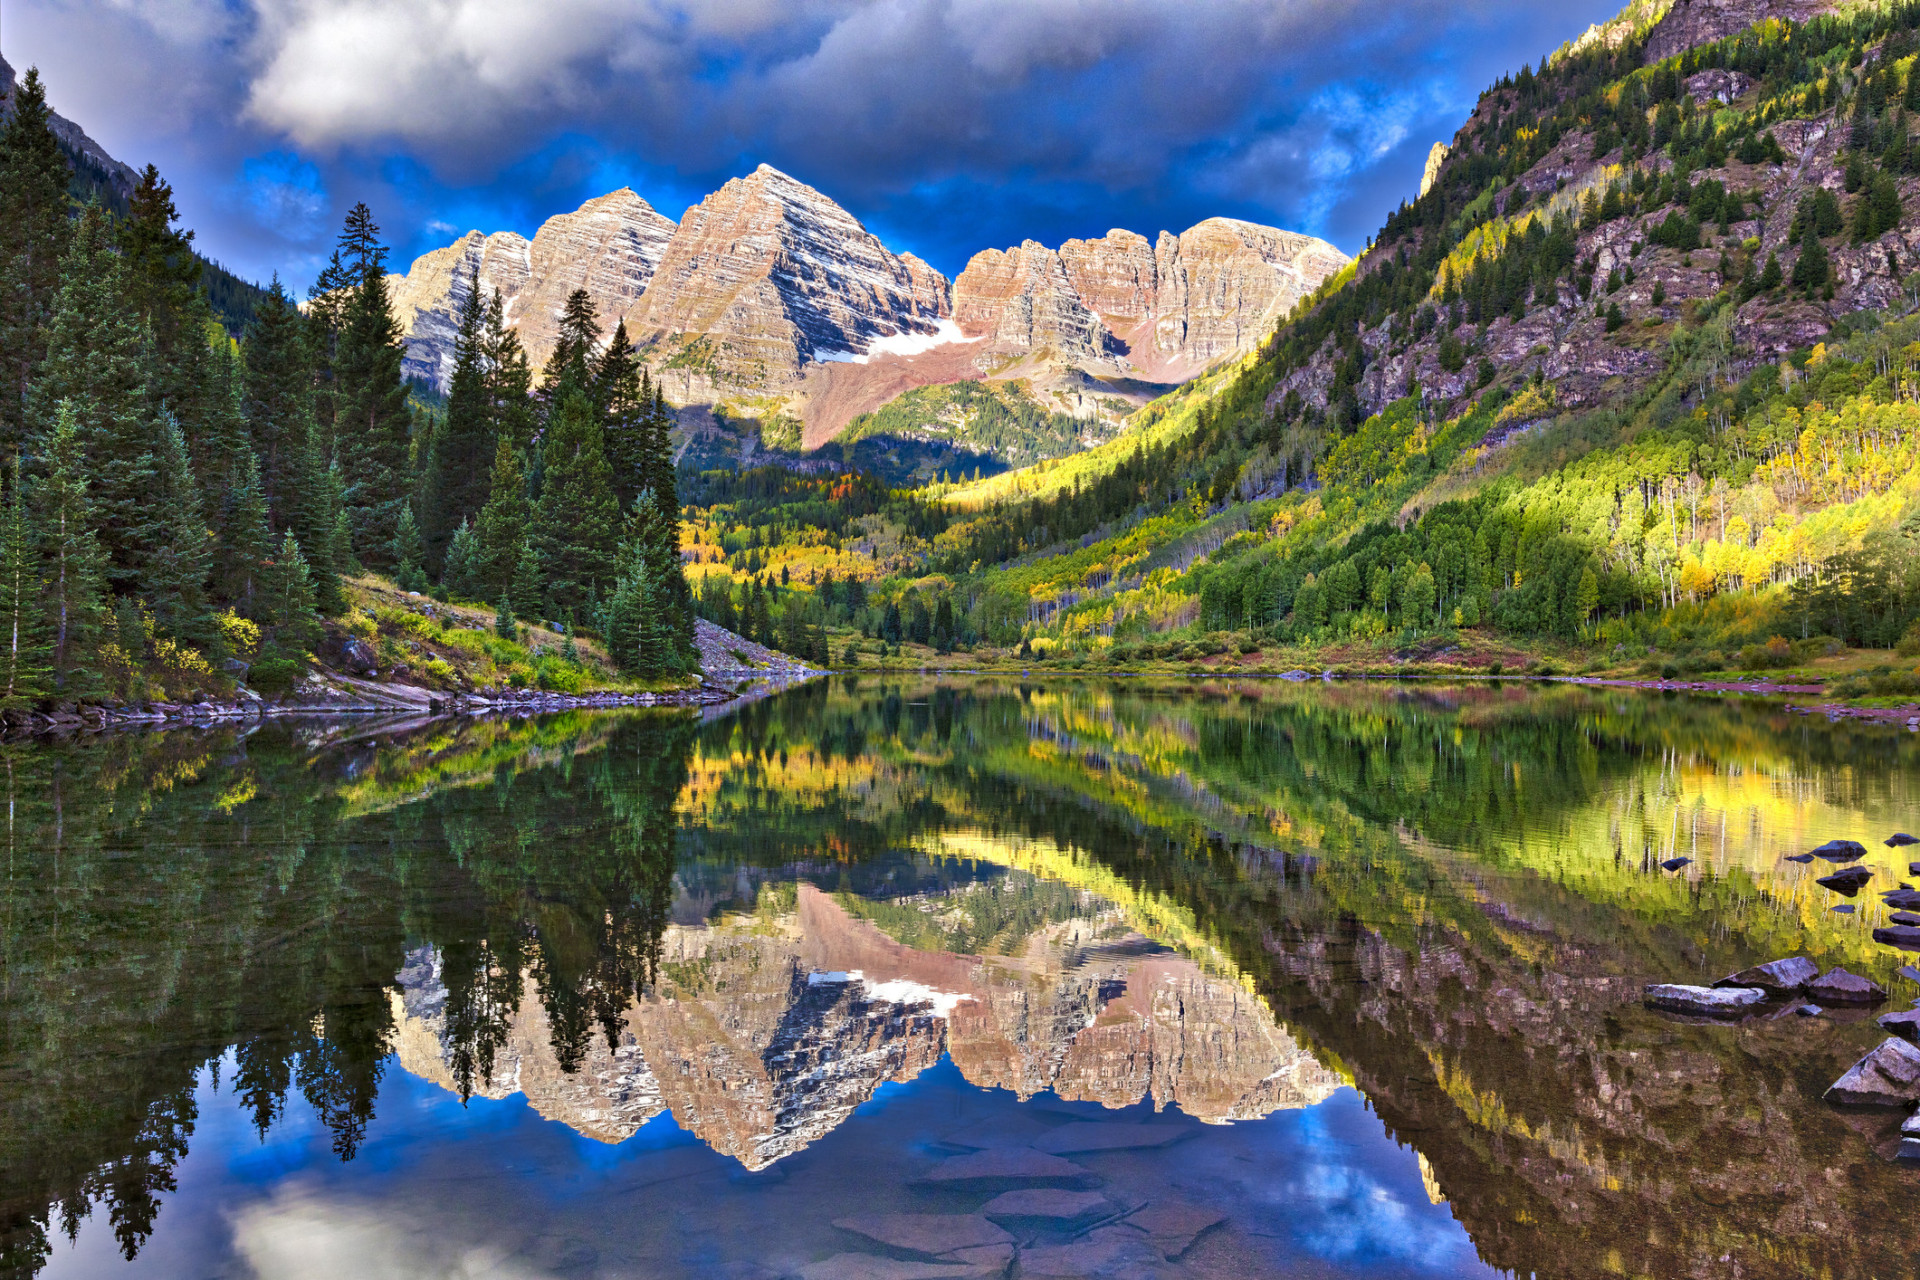 Though this mountain town in Colorado is famous around the world for its ski resorts, its iridescent lakes and fantastic fall foliage make Aspen a must-see destination all year long.<p><a href="https://www.msn.com/en-us/community/channel/vid-7xx8mnucu55yw63we9va2gwr7uihbxwc68fxqp25x6tg4ftibpra?cvid=94631541bc0f4f89bfd59158d696ad7e">Follow us and access great exclusive content every day</a></p>